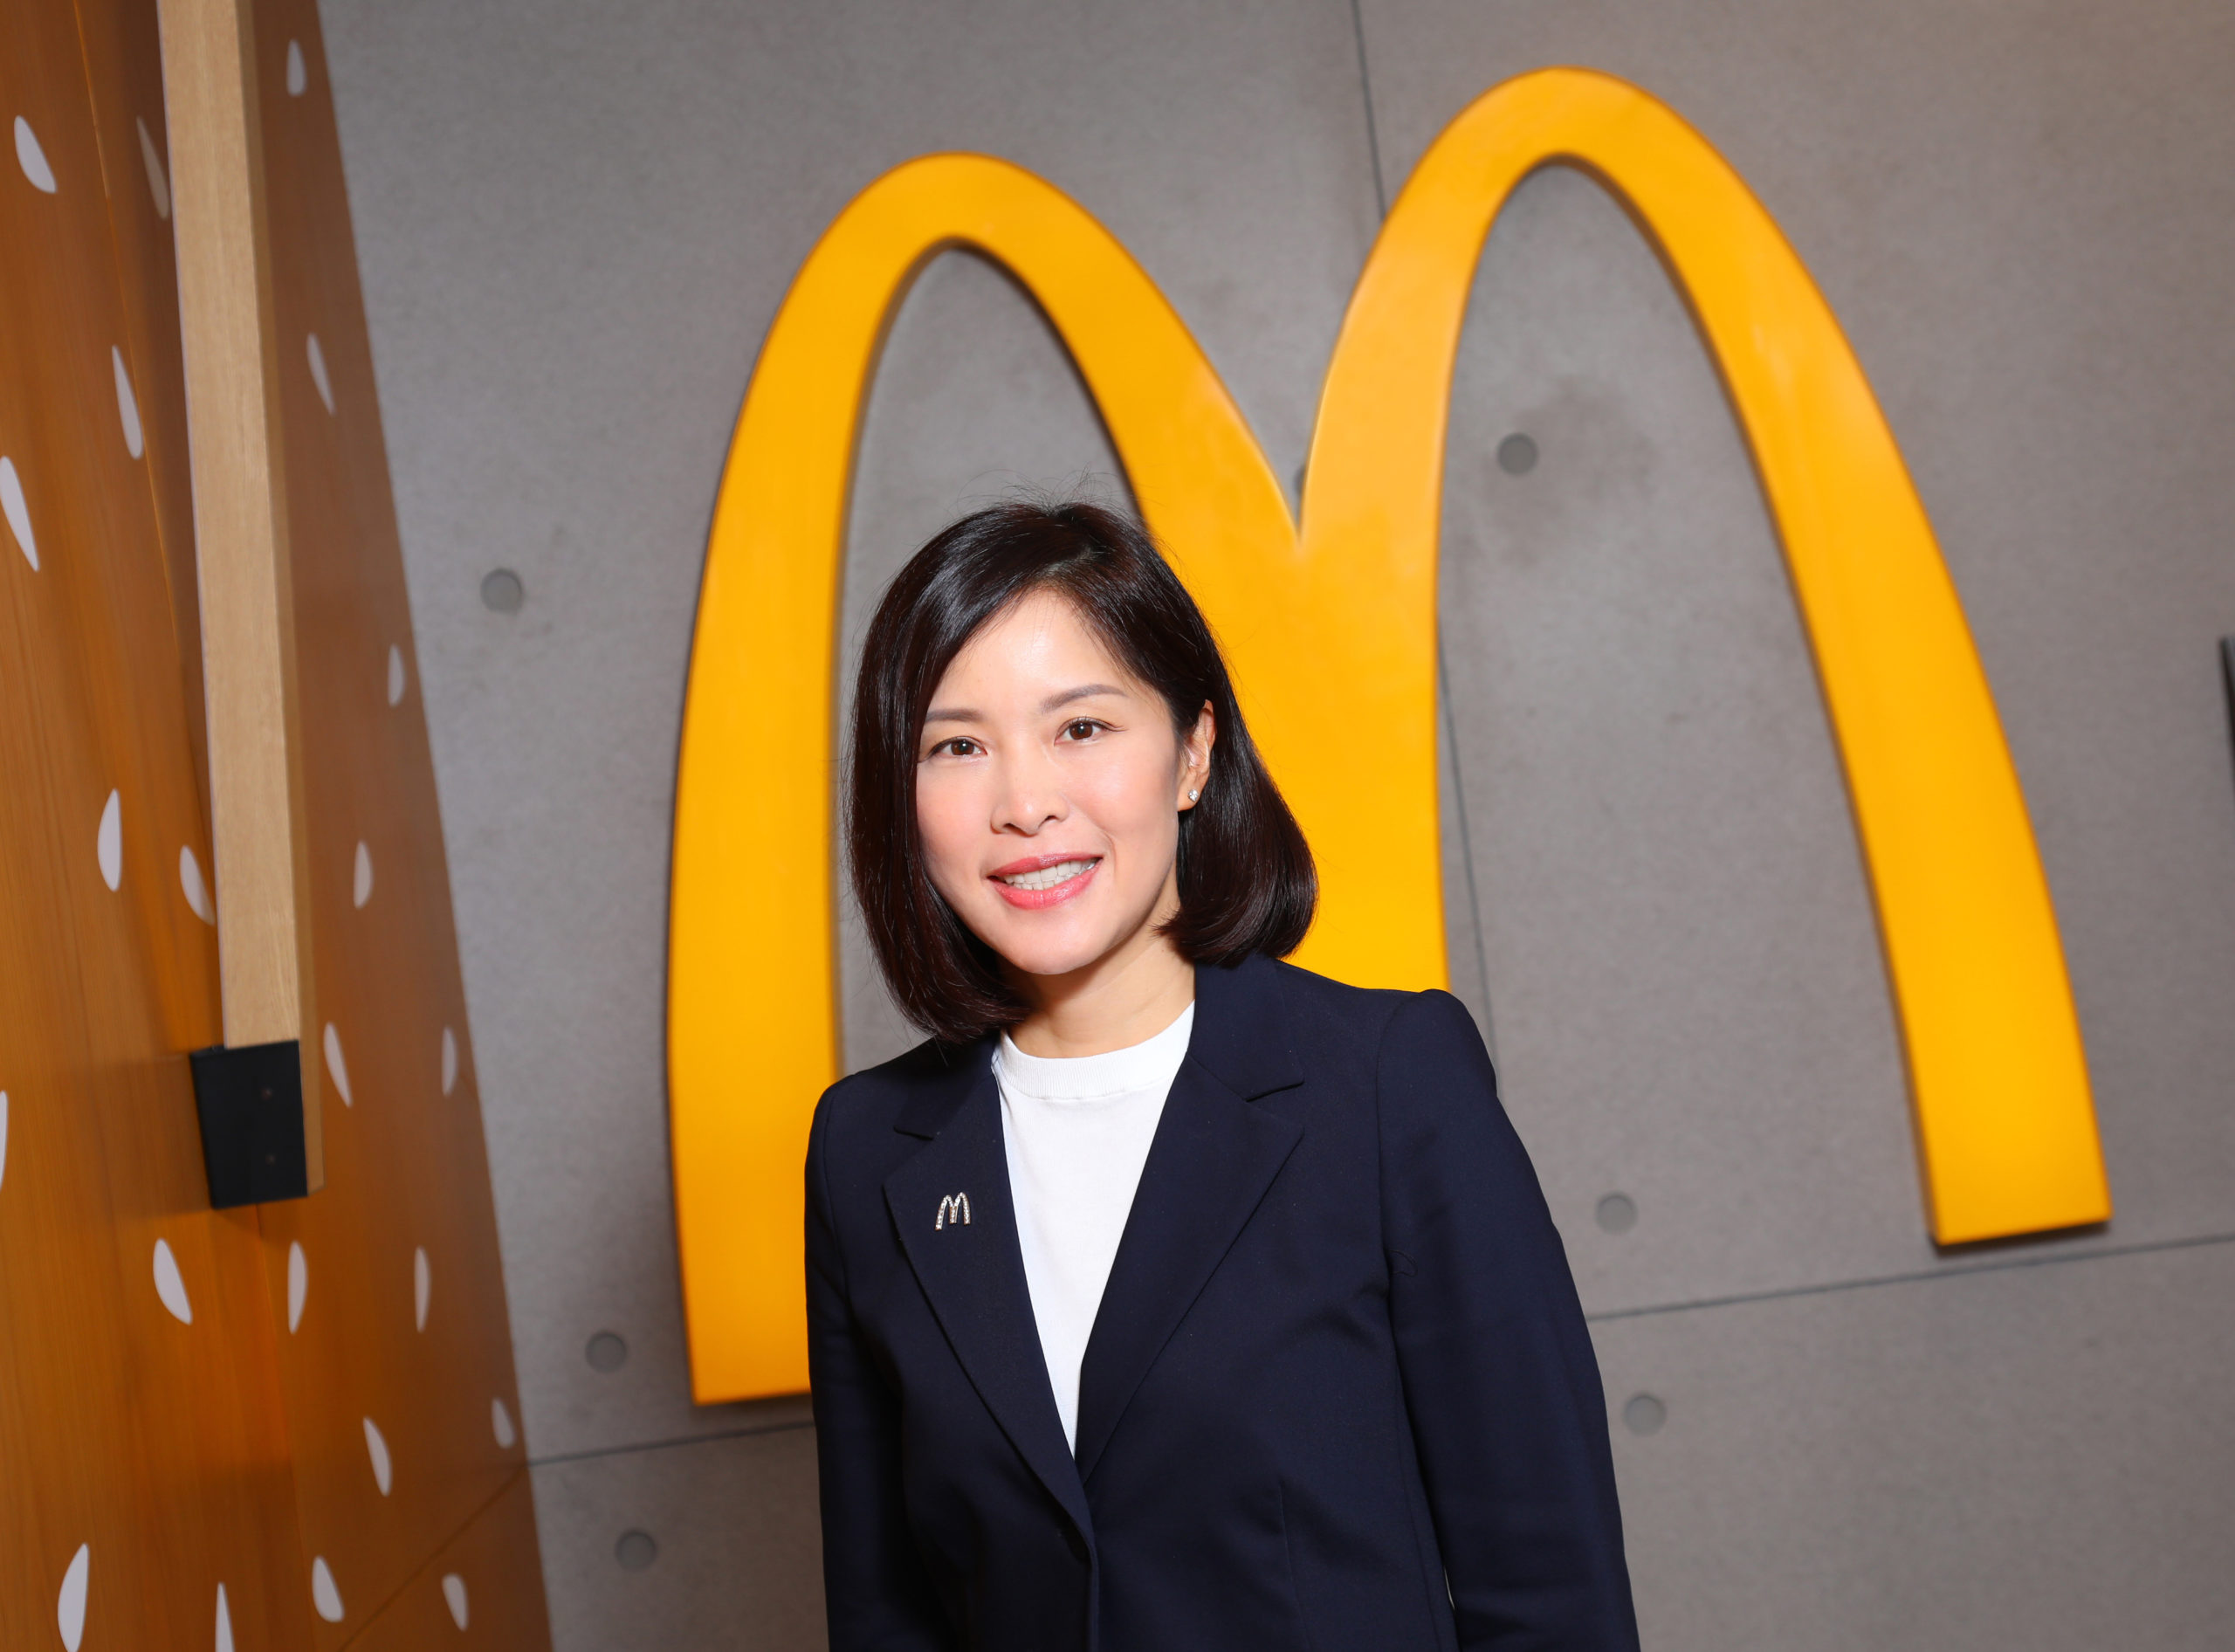 Randy is continually innovating for McDonald’s Hong Kong. She is guided by the balance among customer needs, brand image and feasibility.